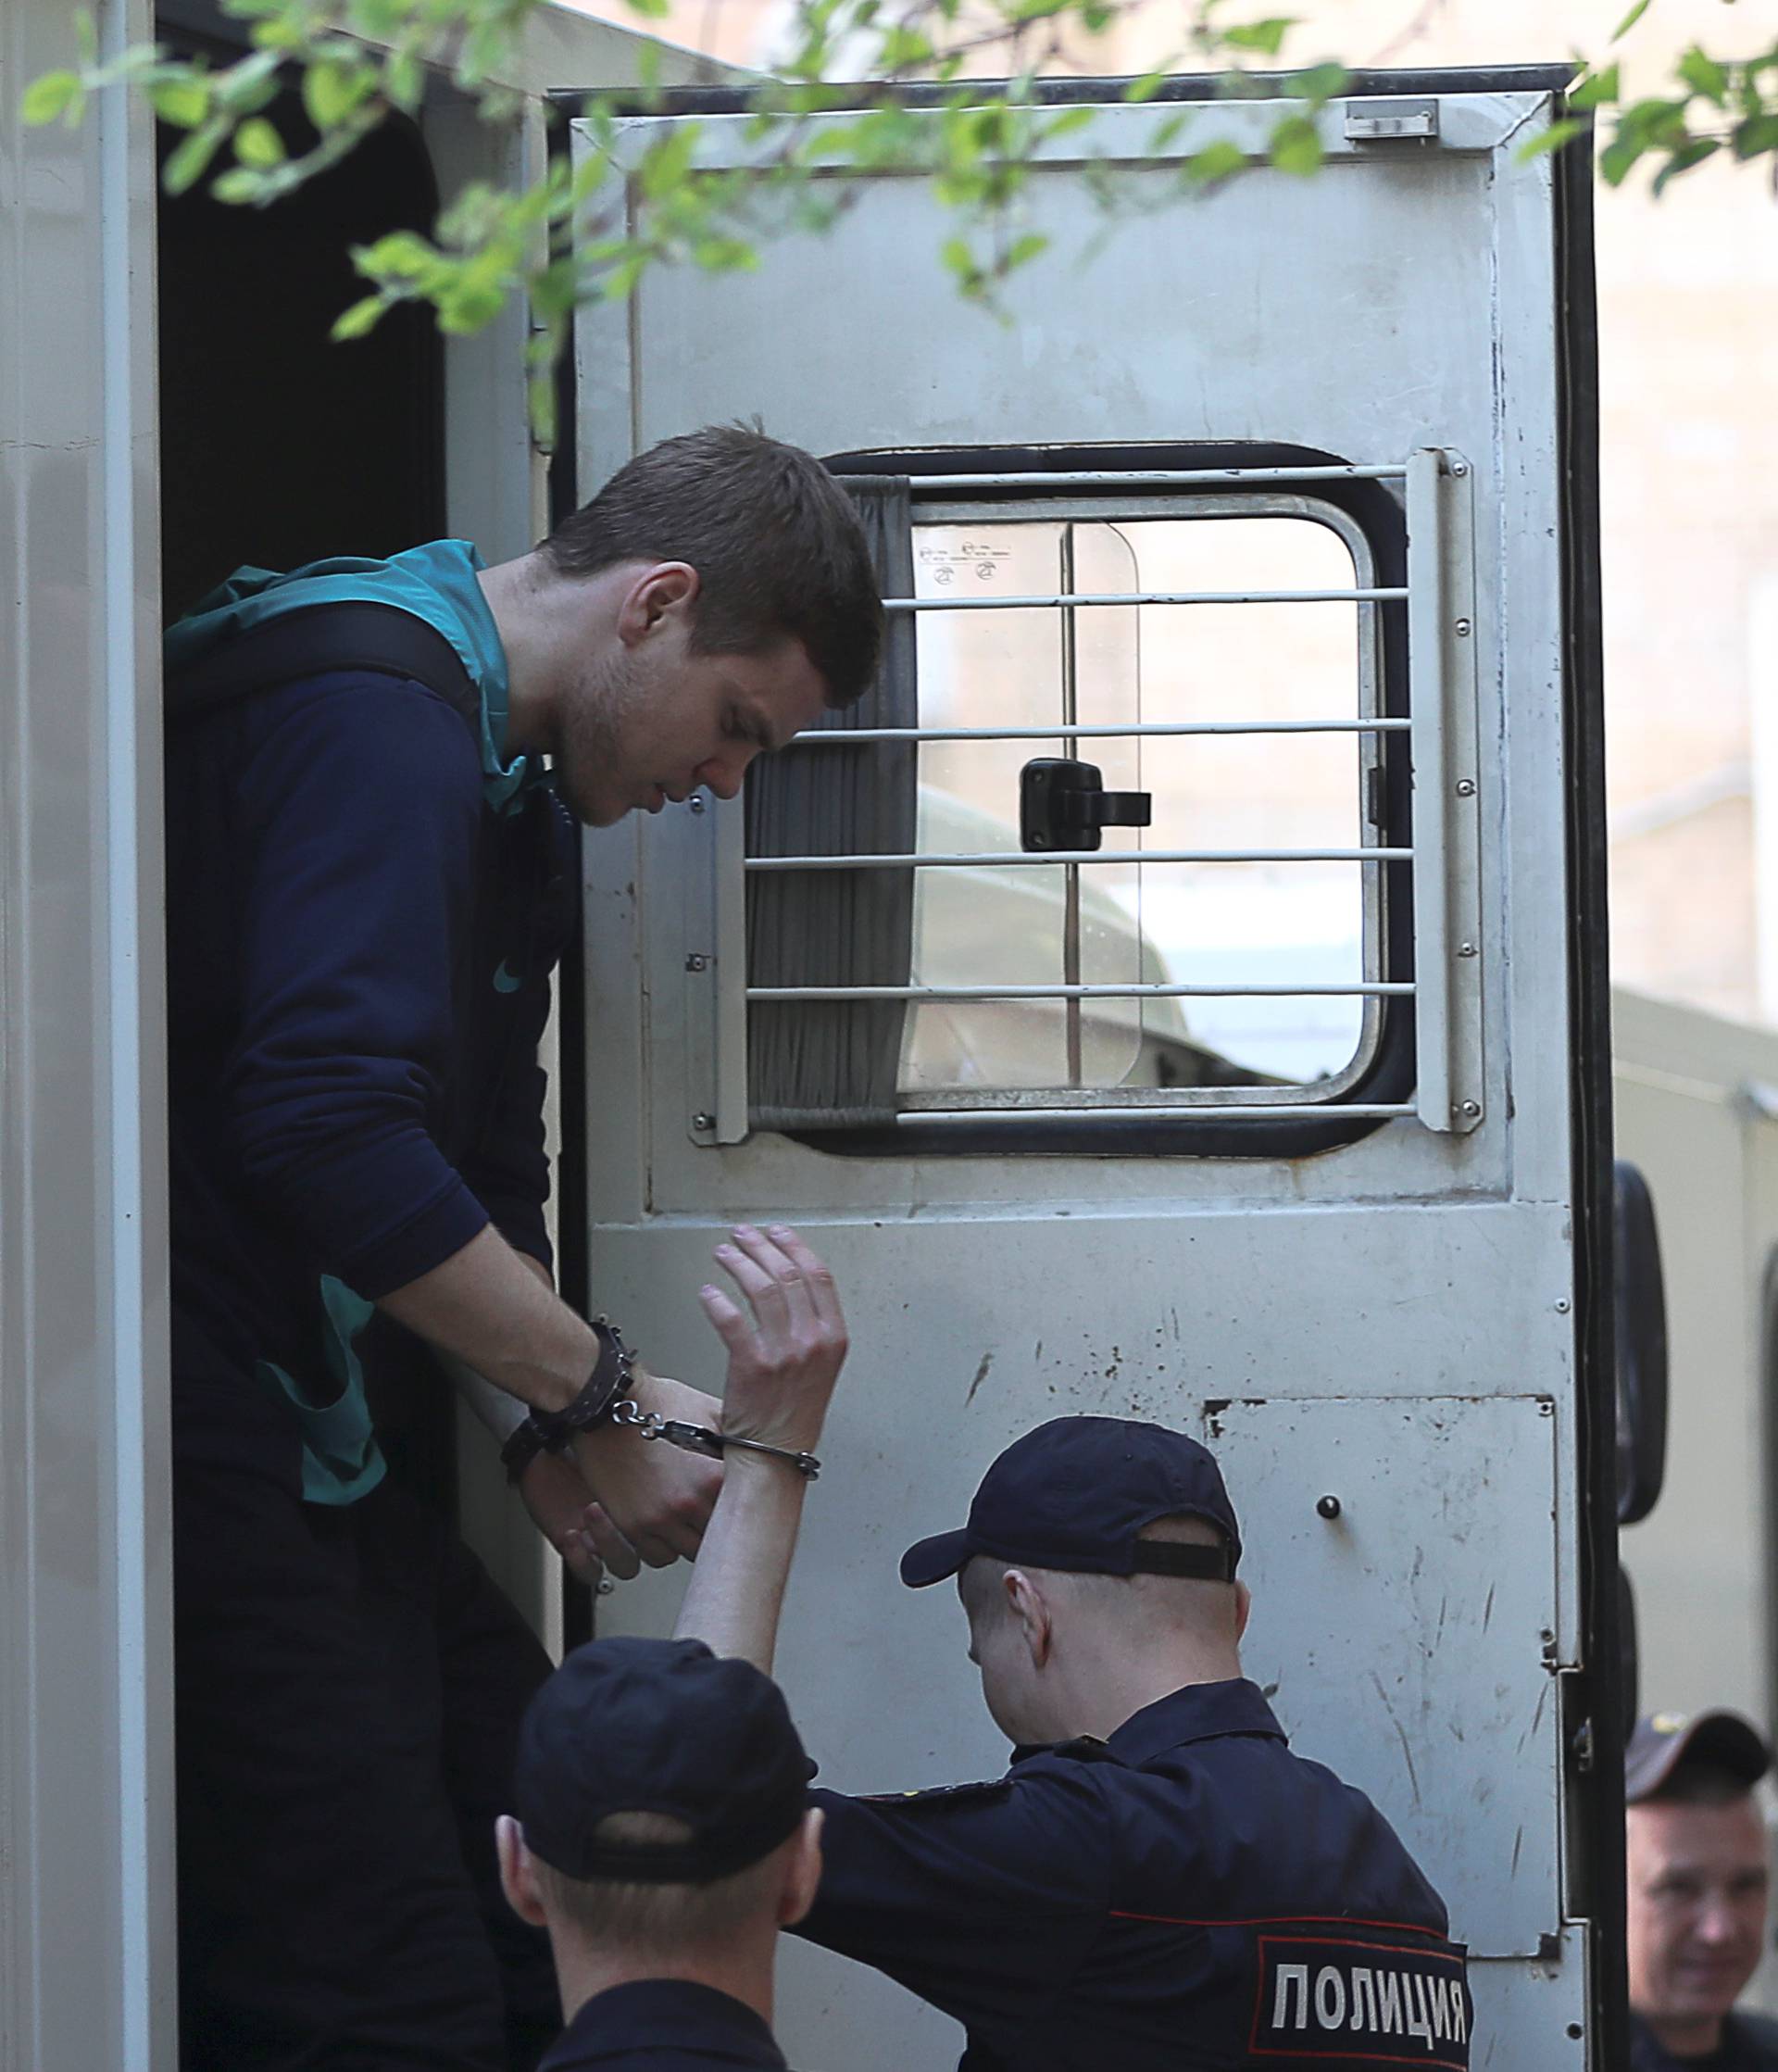 Russian soccer player Kokorin walks out of a truck before a court hearing in Moscow